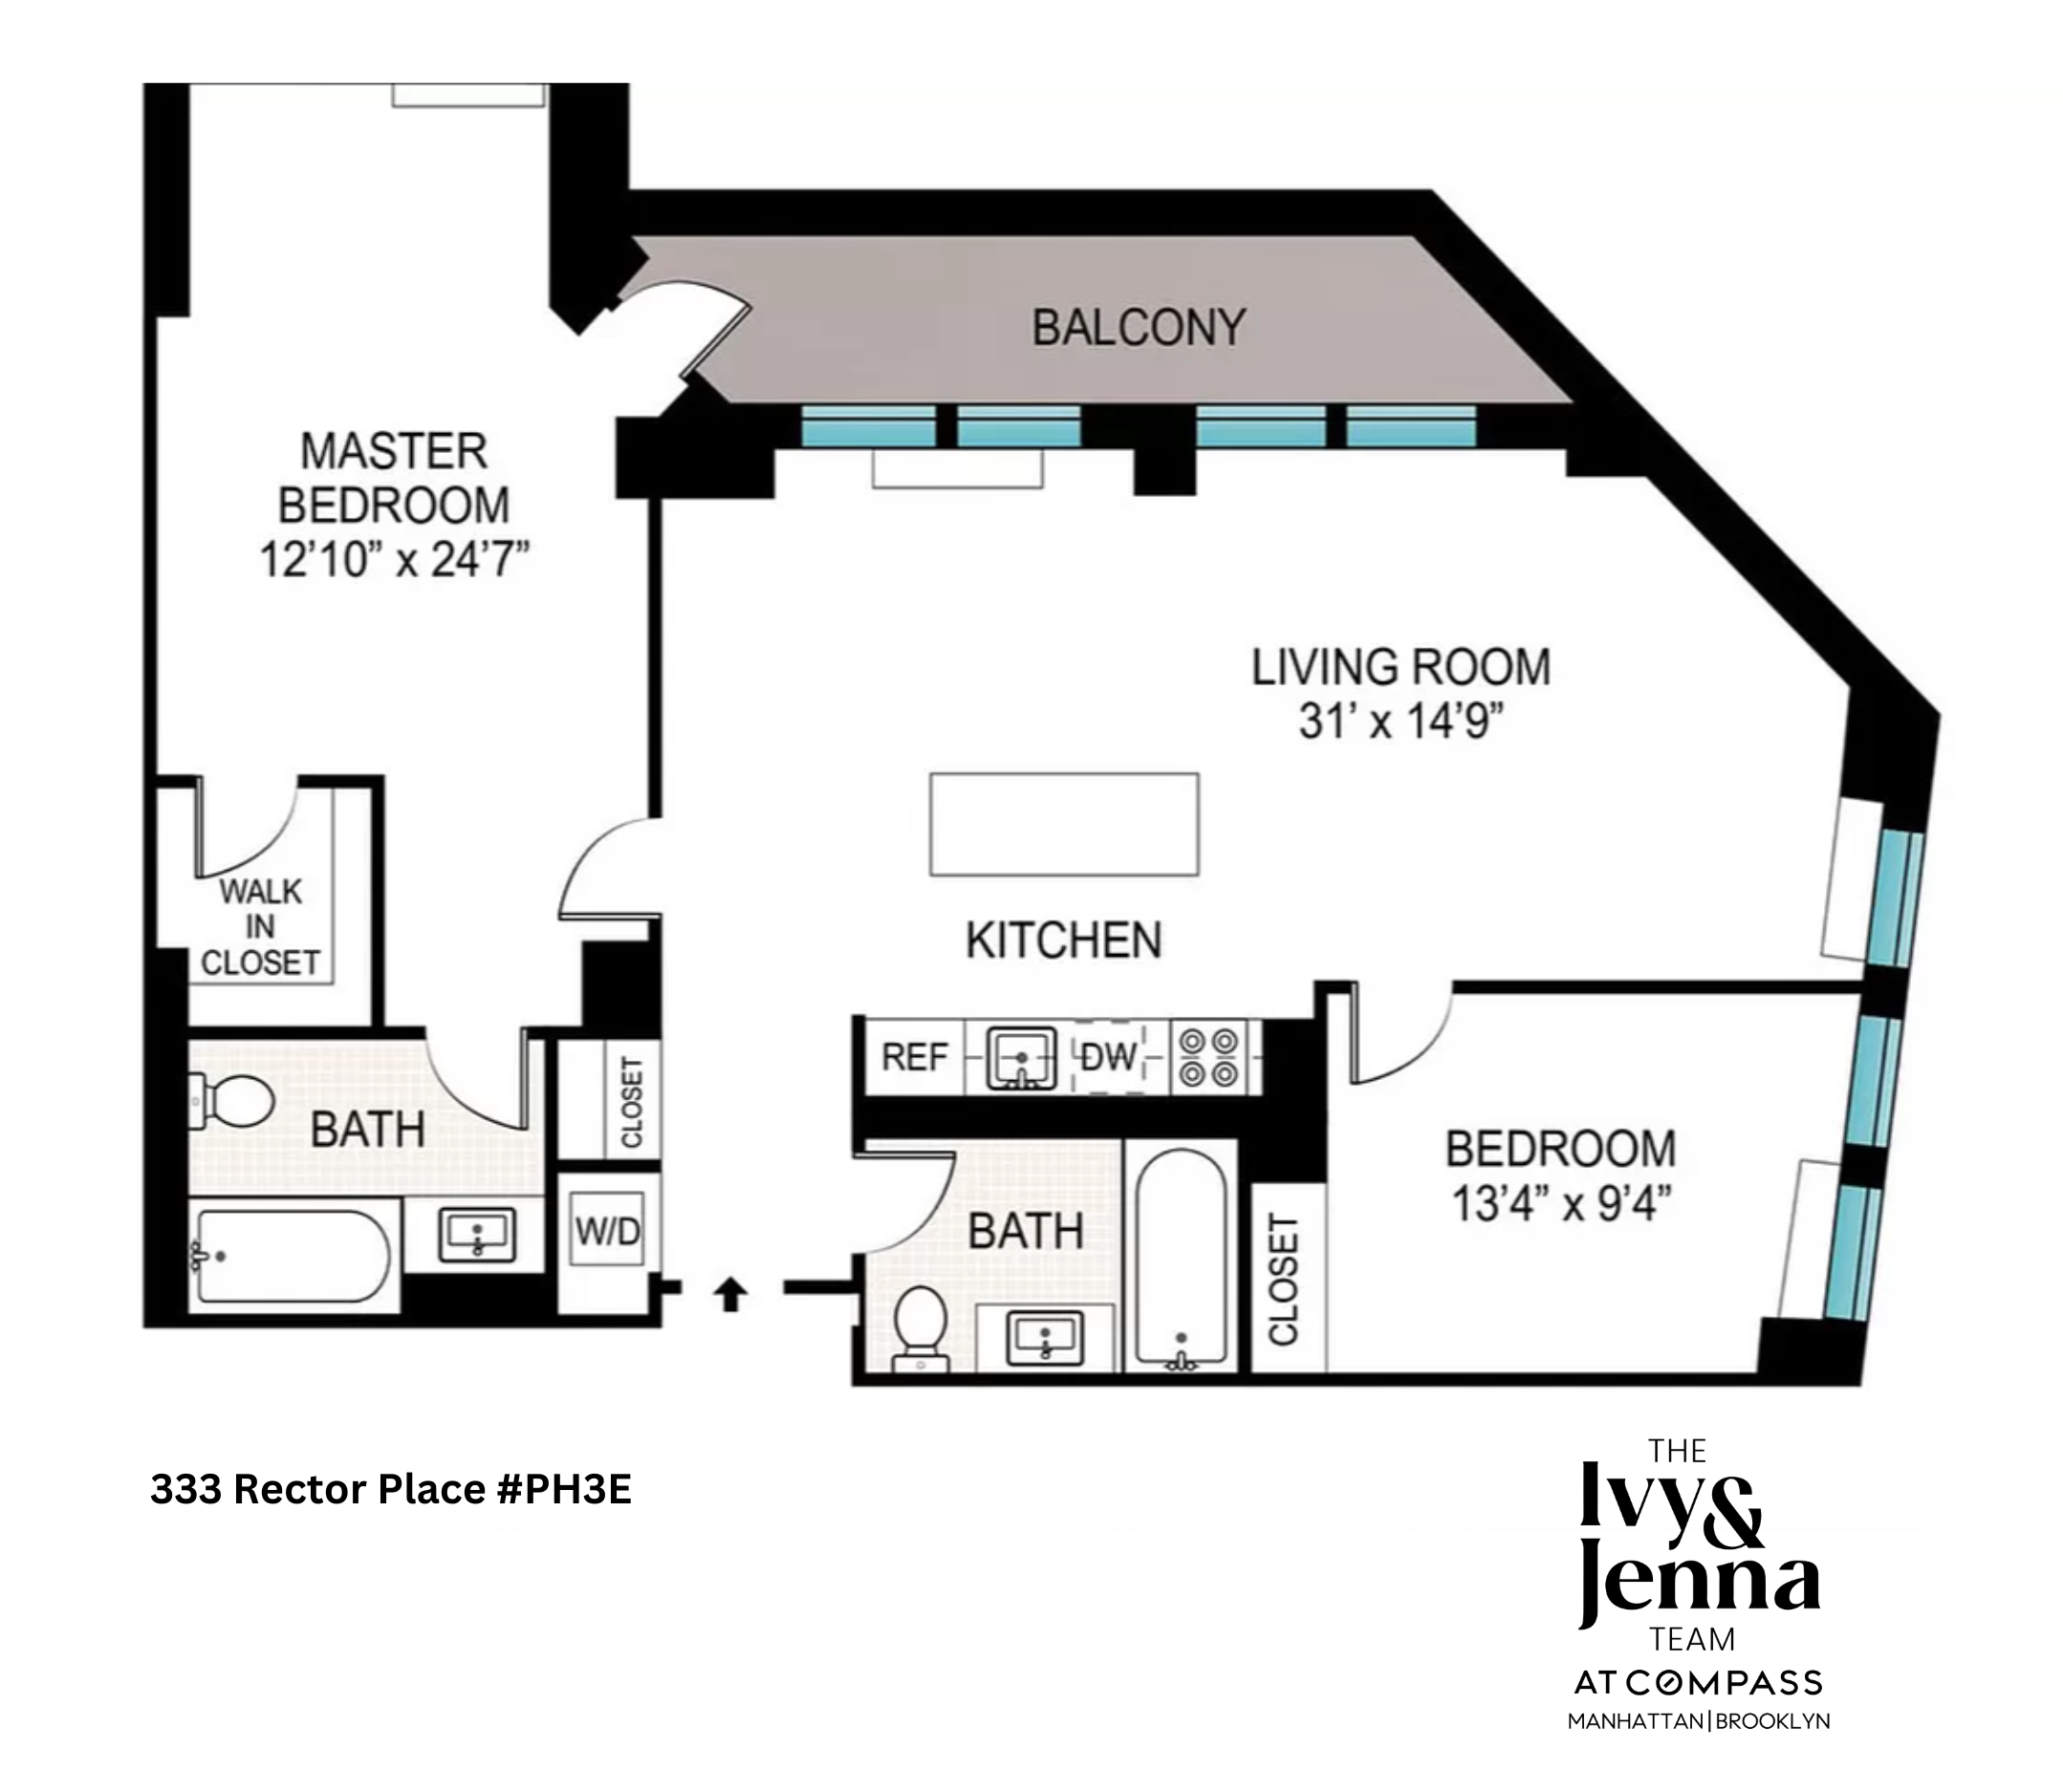 Floorplan for 333 Rector Place, PH3E